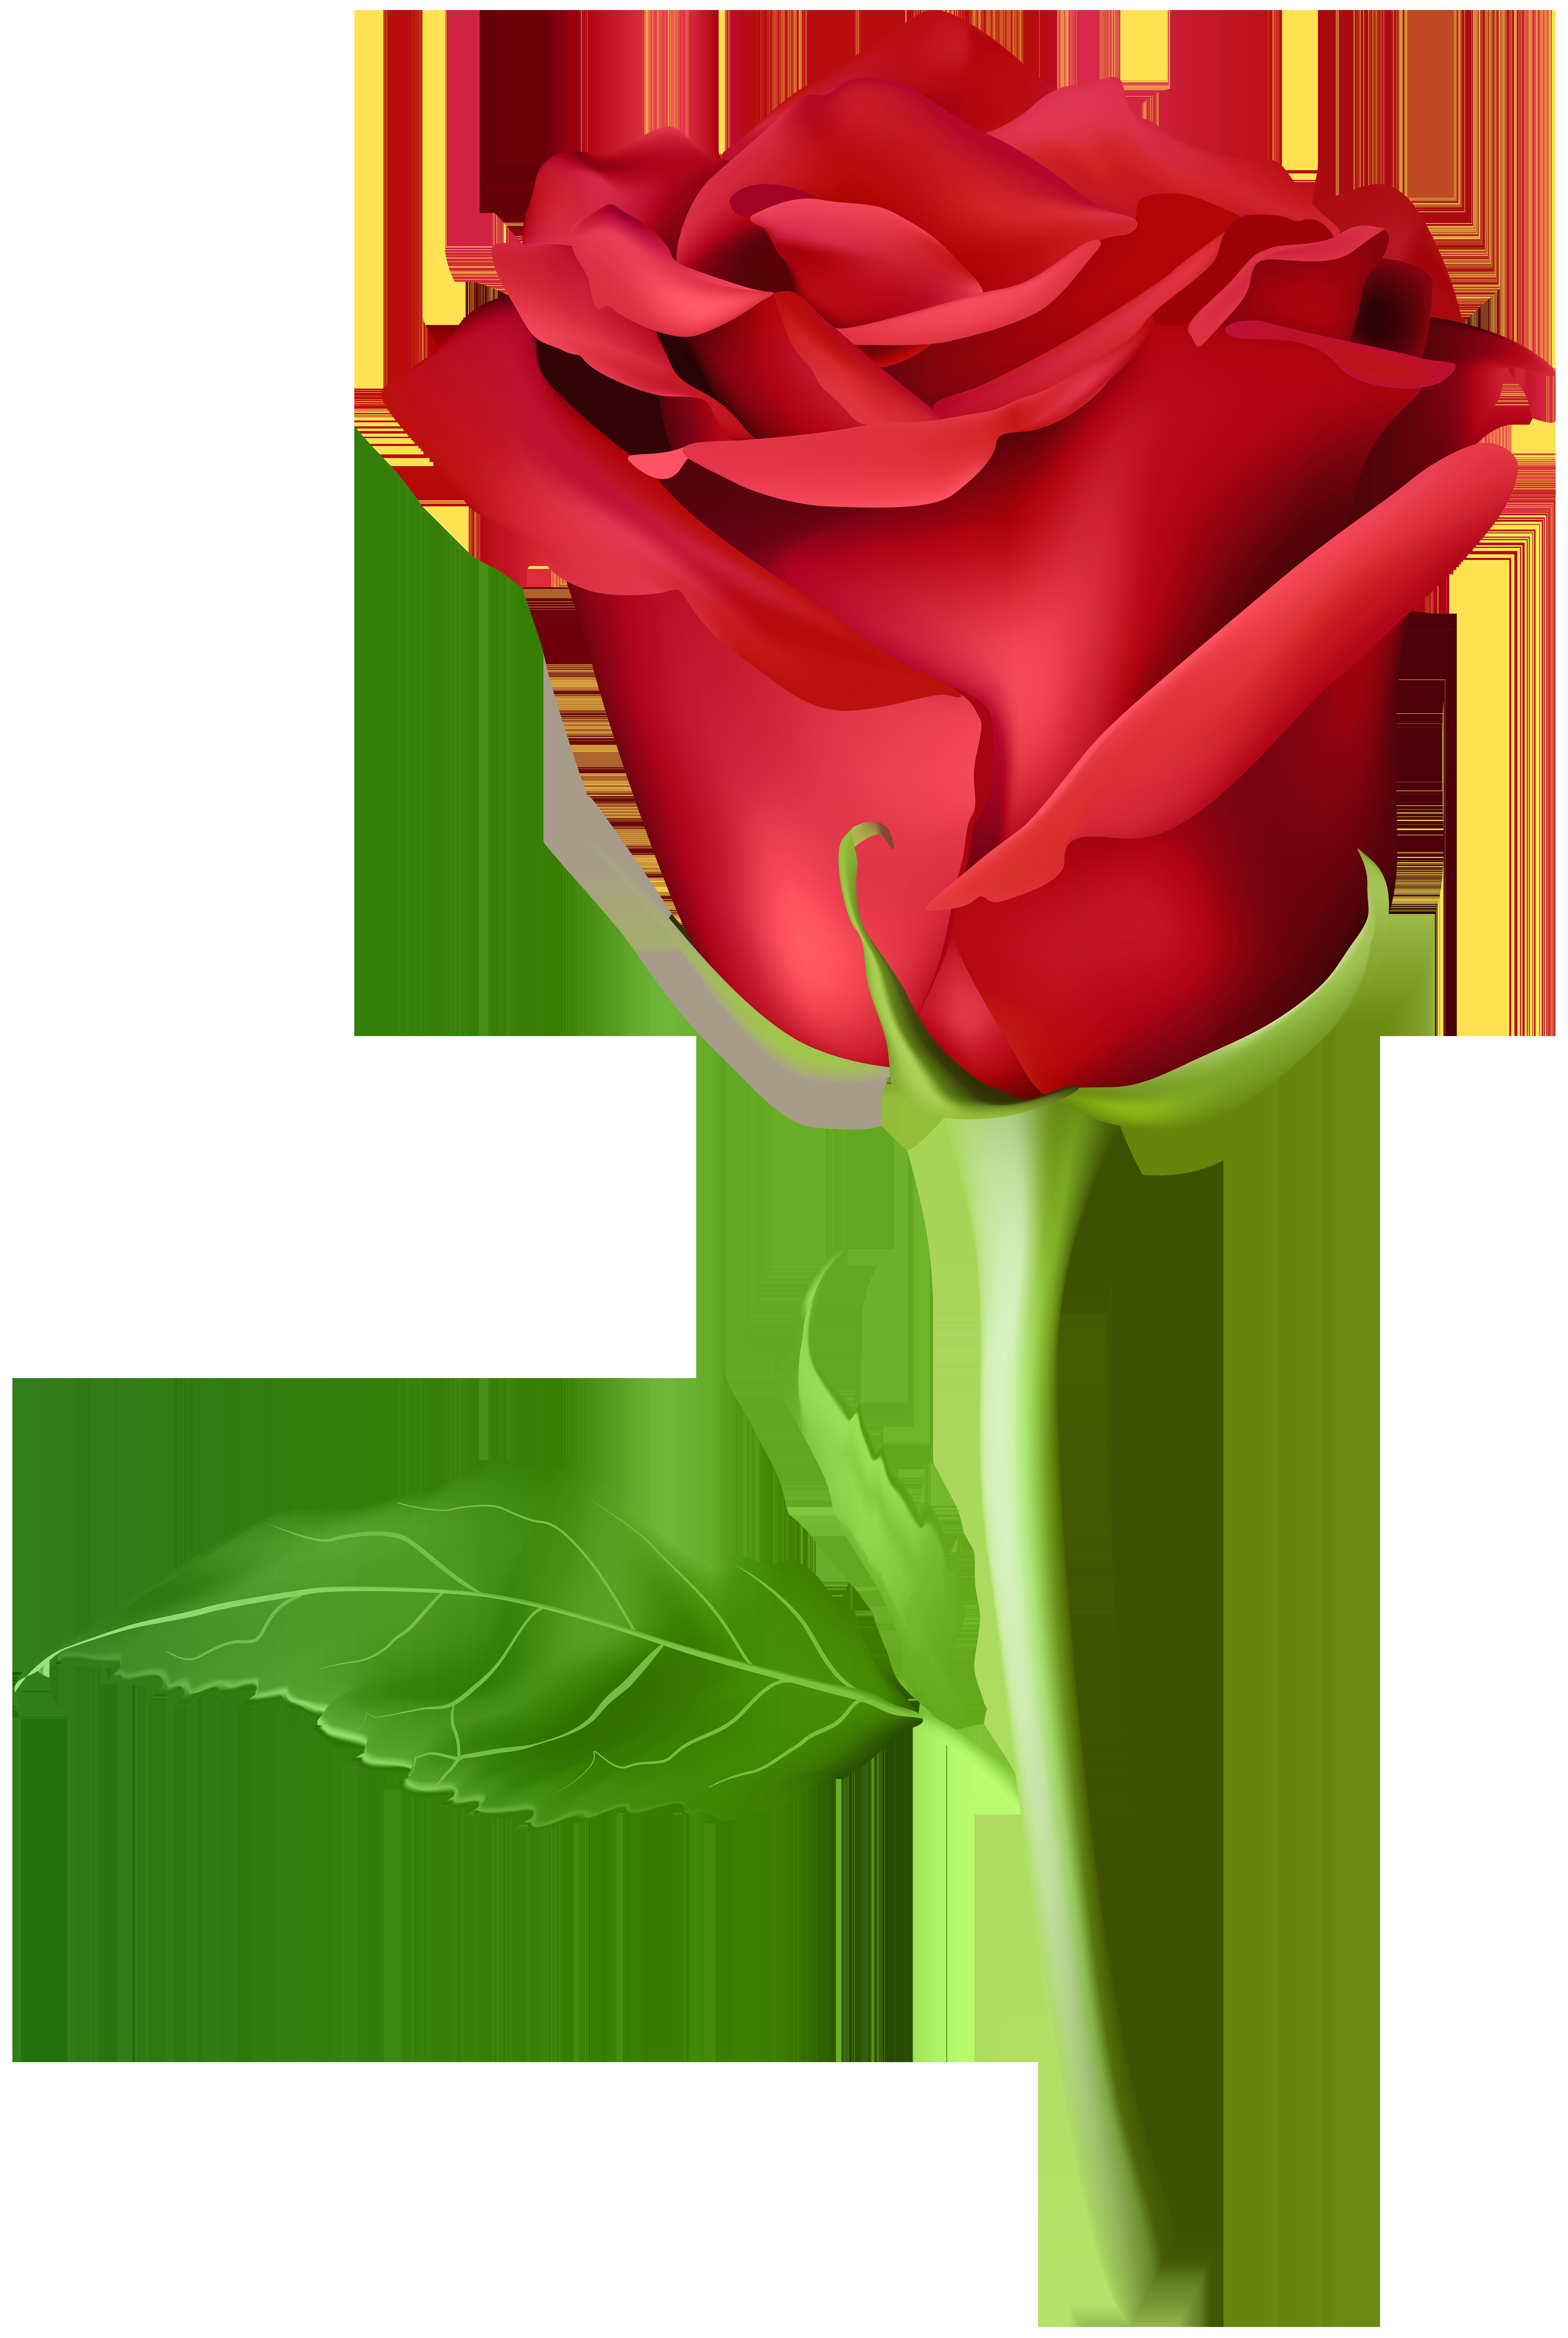 Drawing Of A Beautiful Red Rose Pin by Kittu Raja On Nk Red Roses Rose Flower Pictures Rose